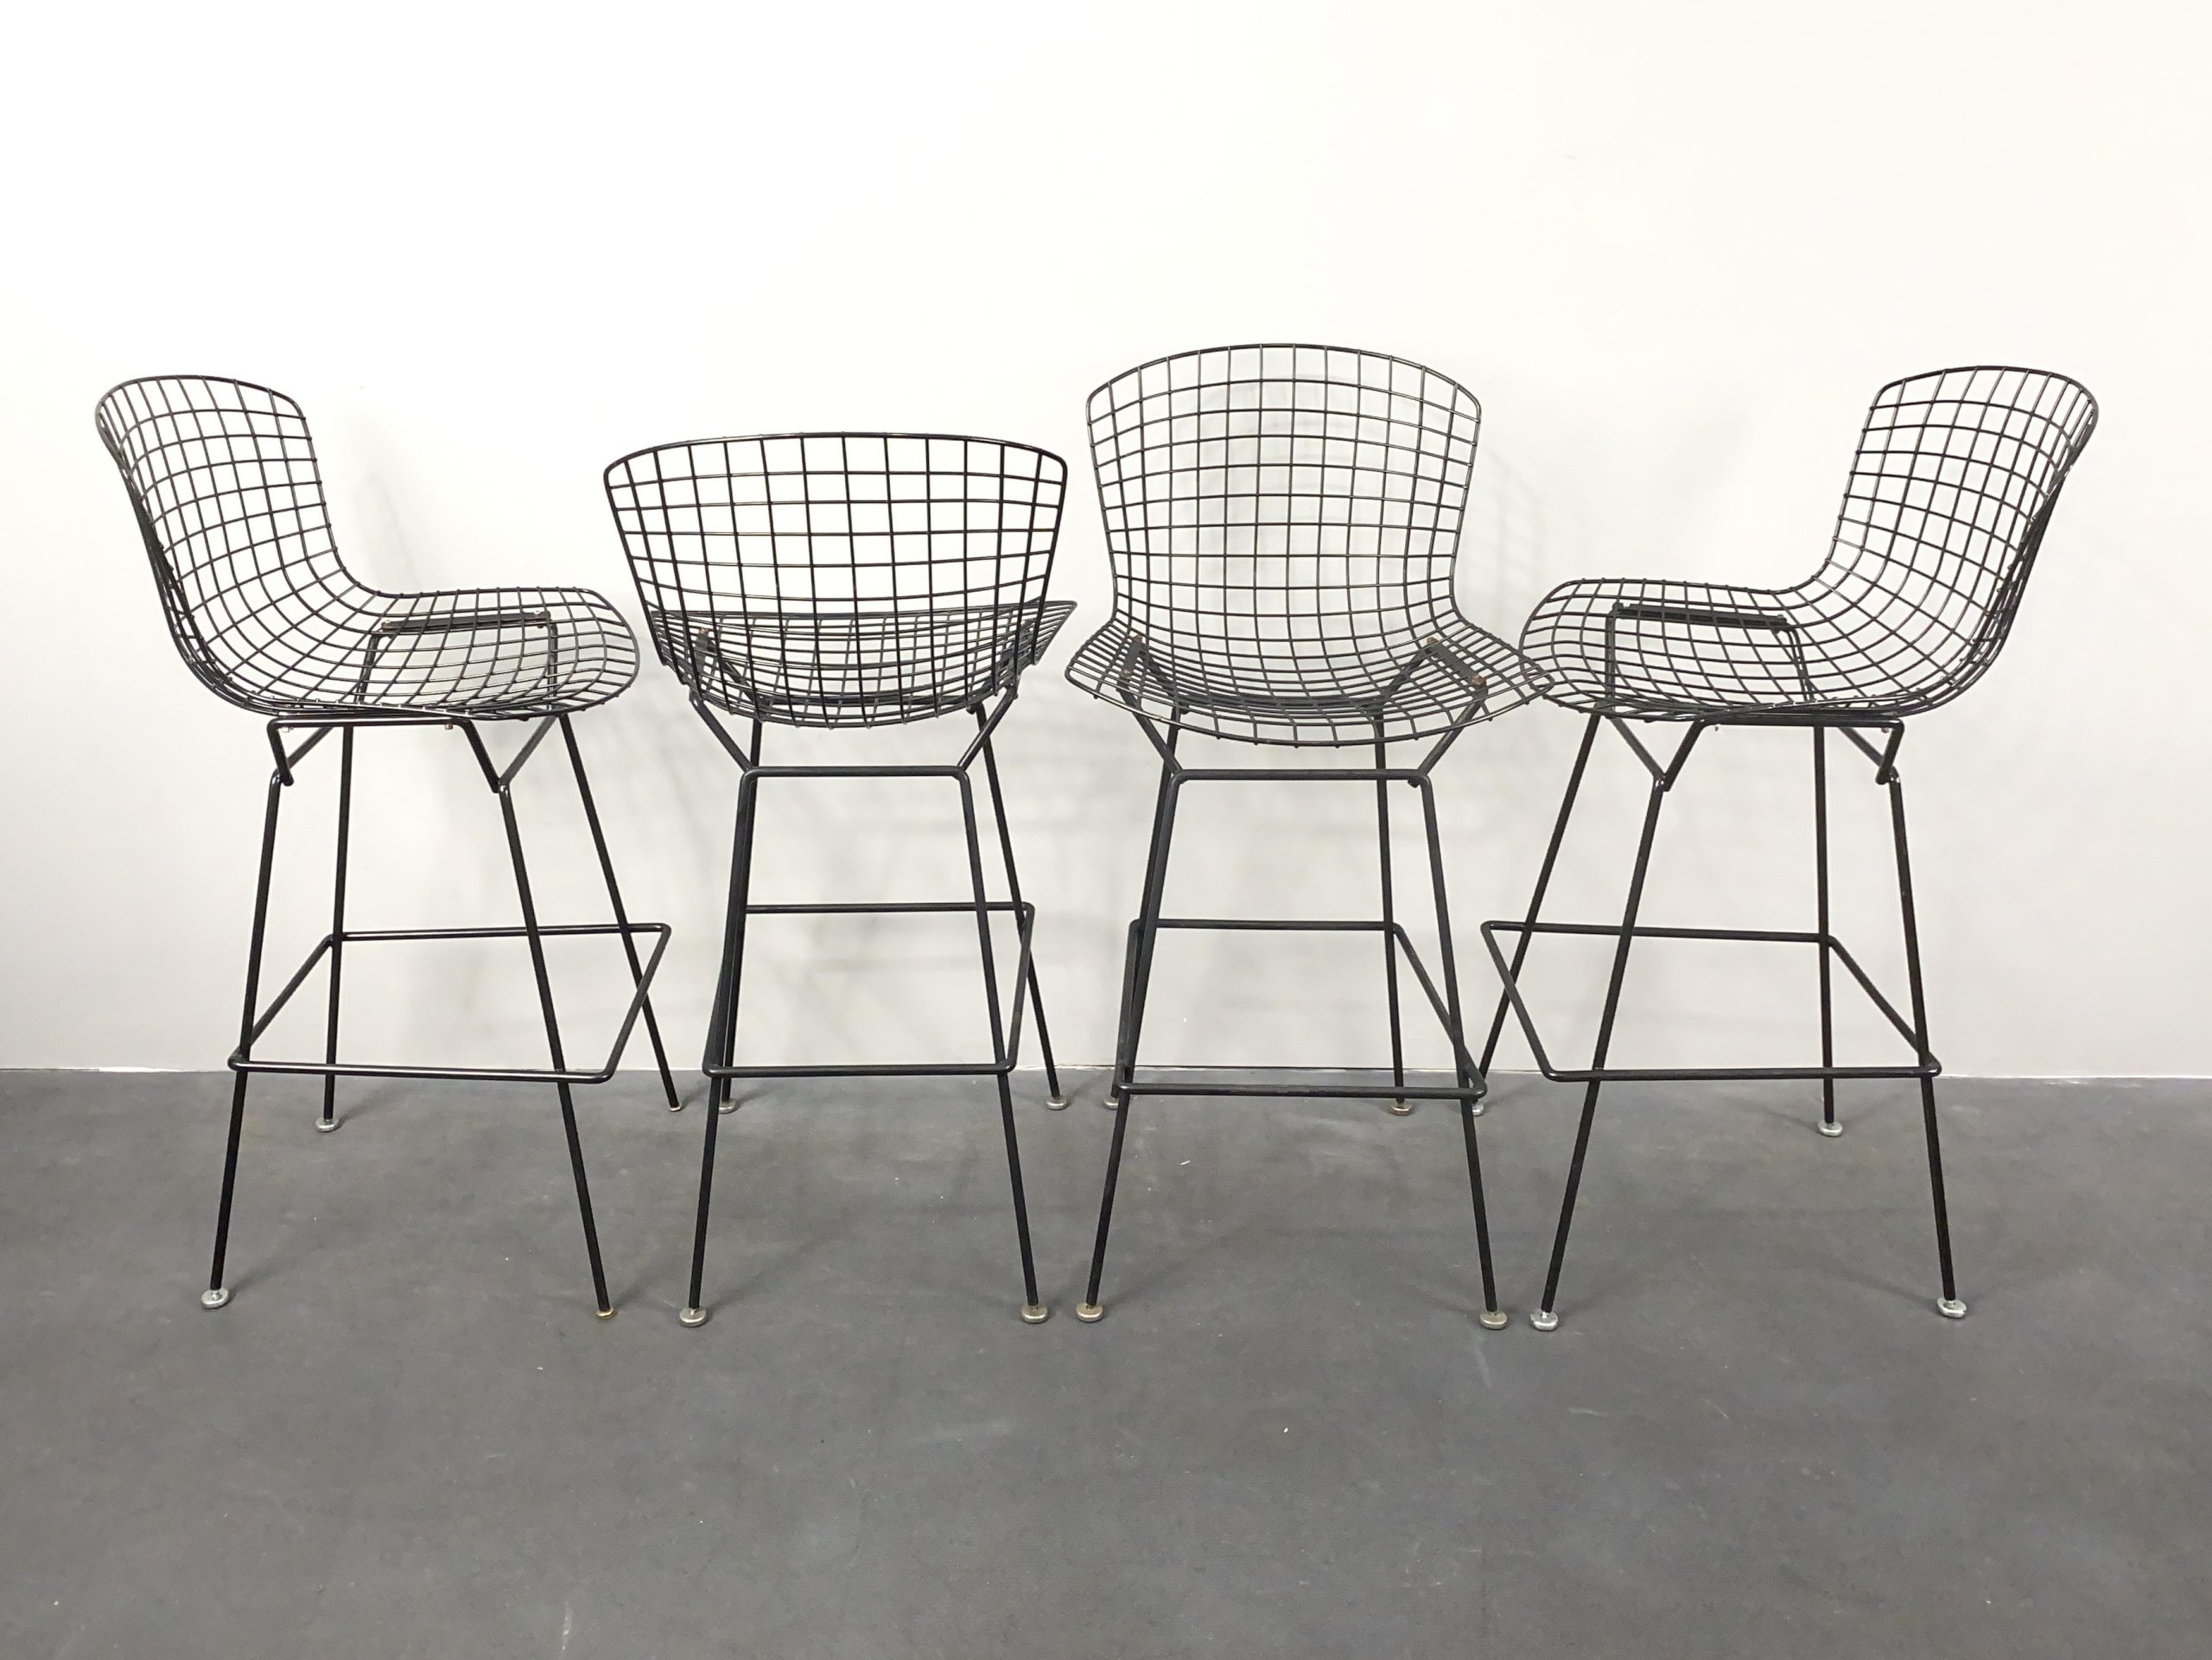 Set of 4 Bar Stools by Harry Bertoia for Knoll International, USA, 60s.